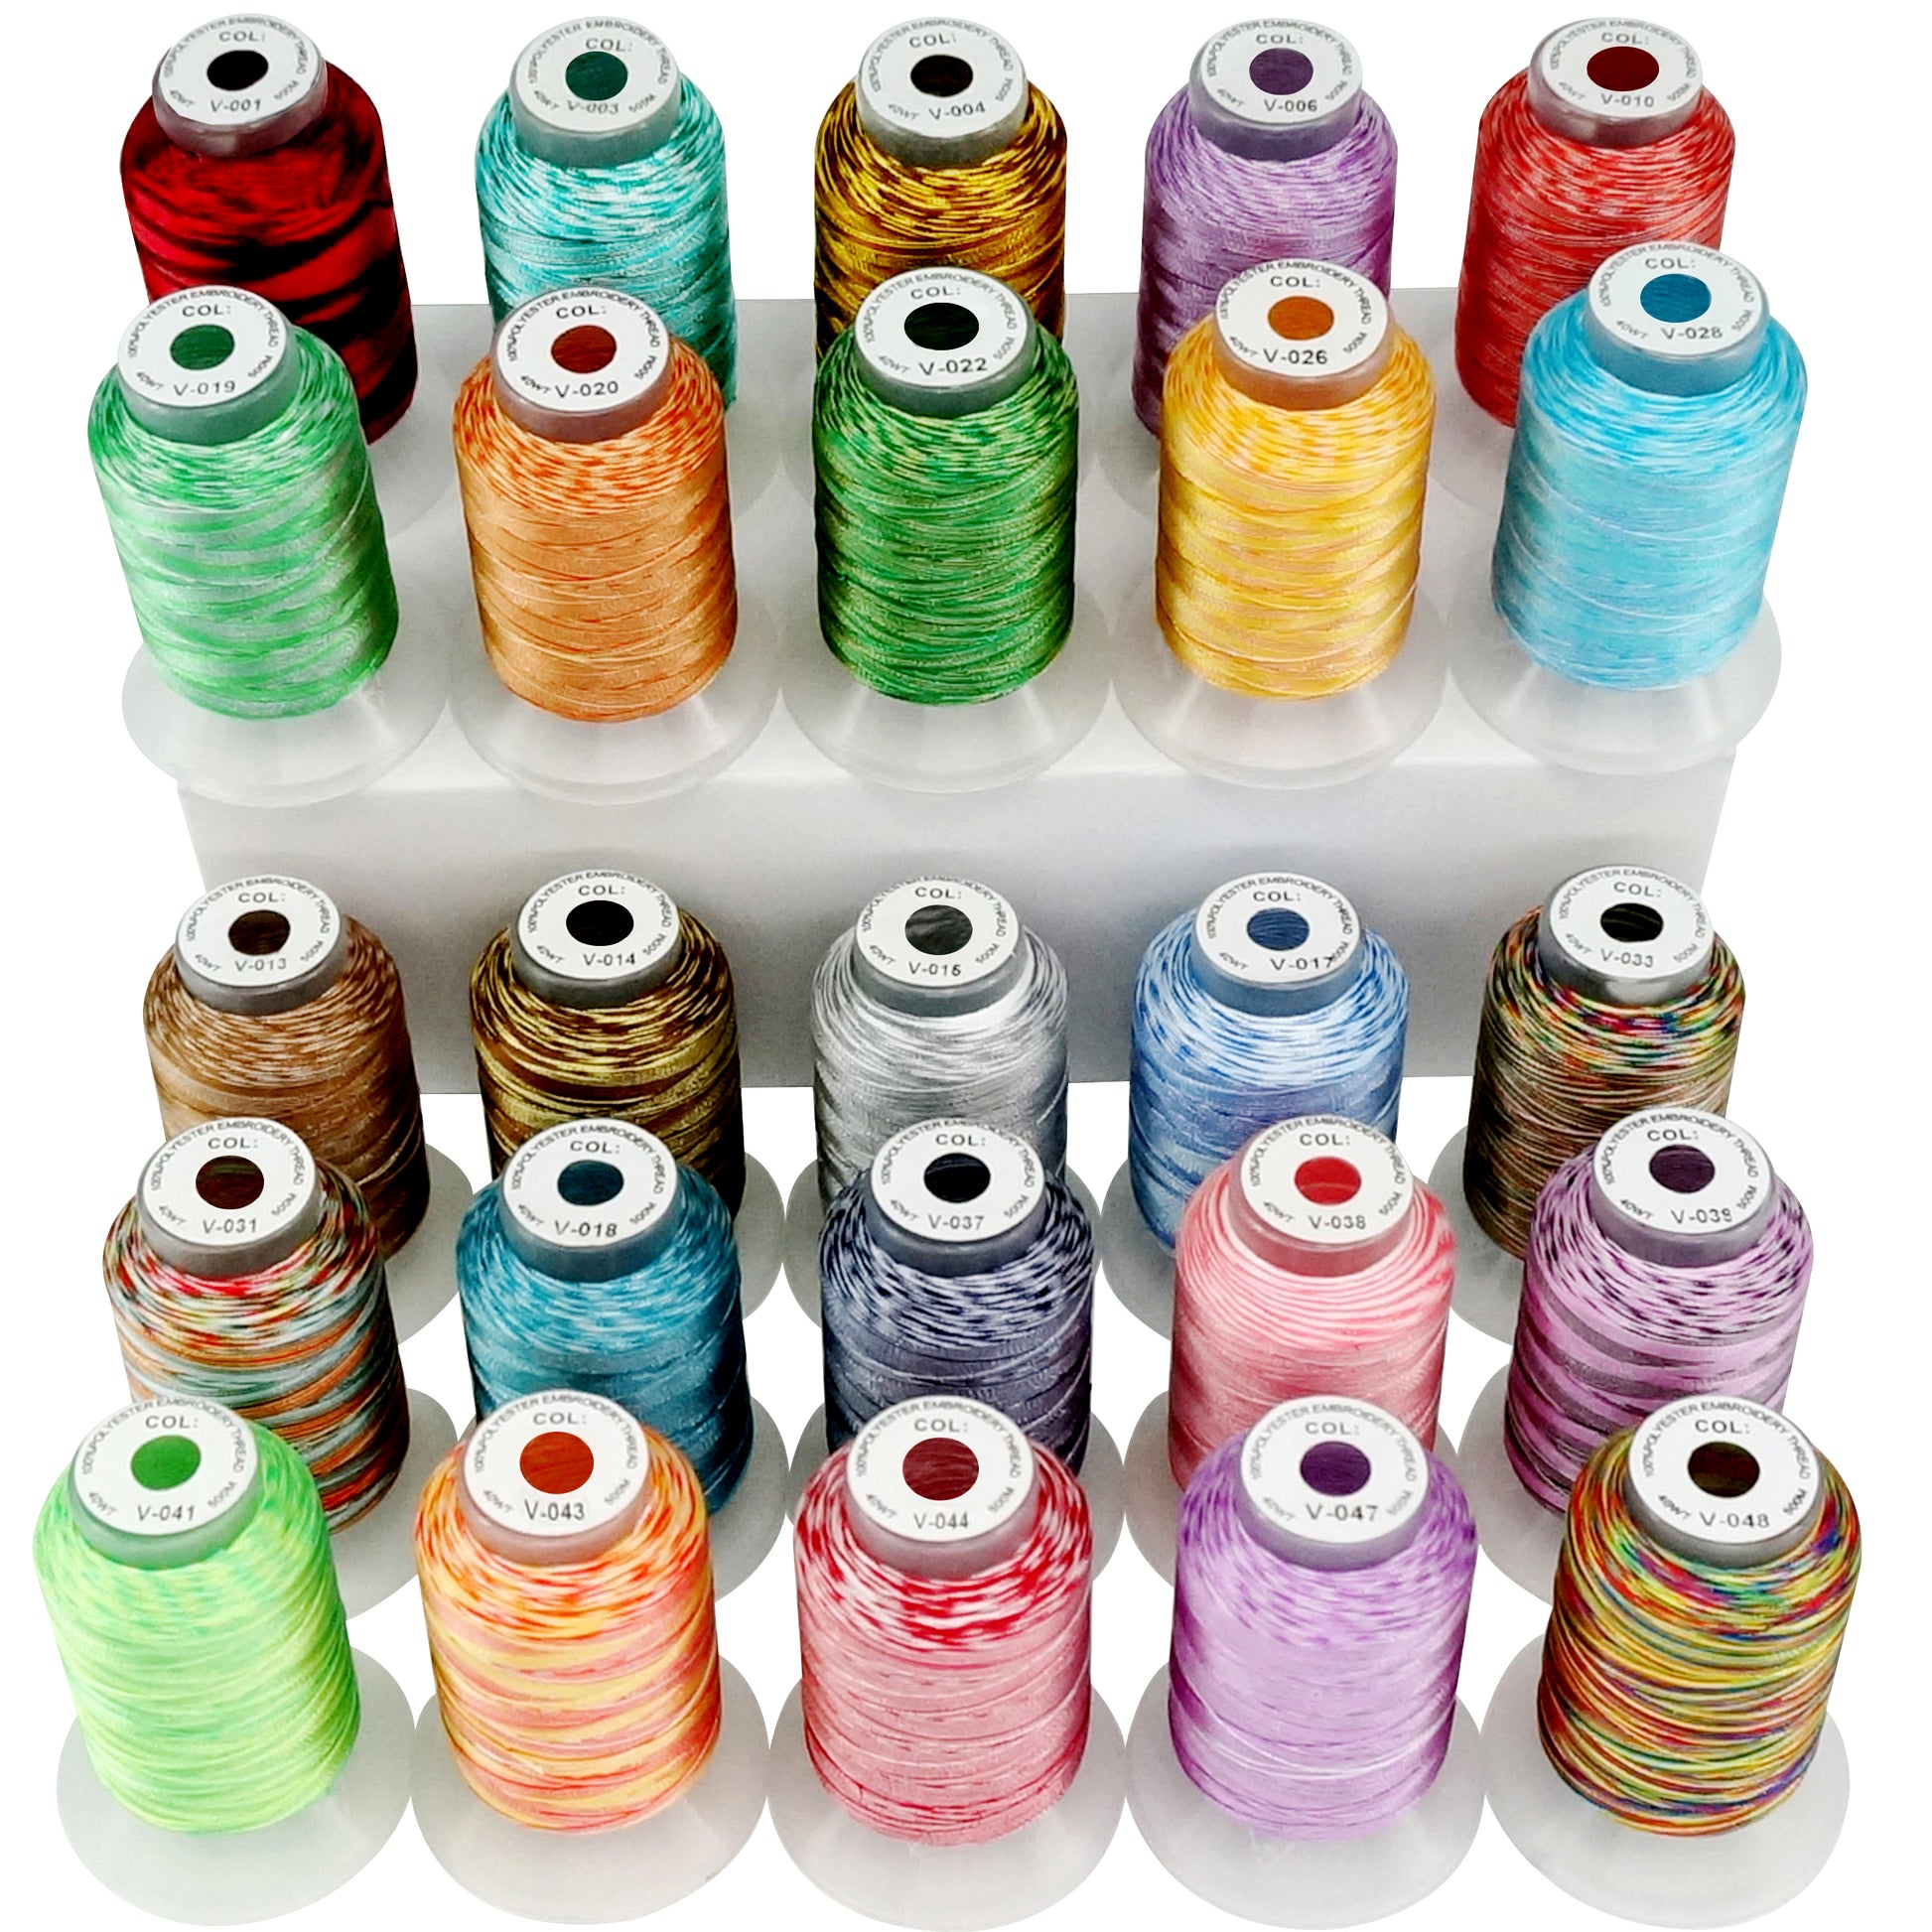 Reflective Embroidery Thread Set - 12 Colors Package 1000M